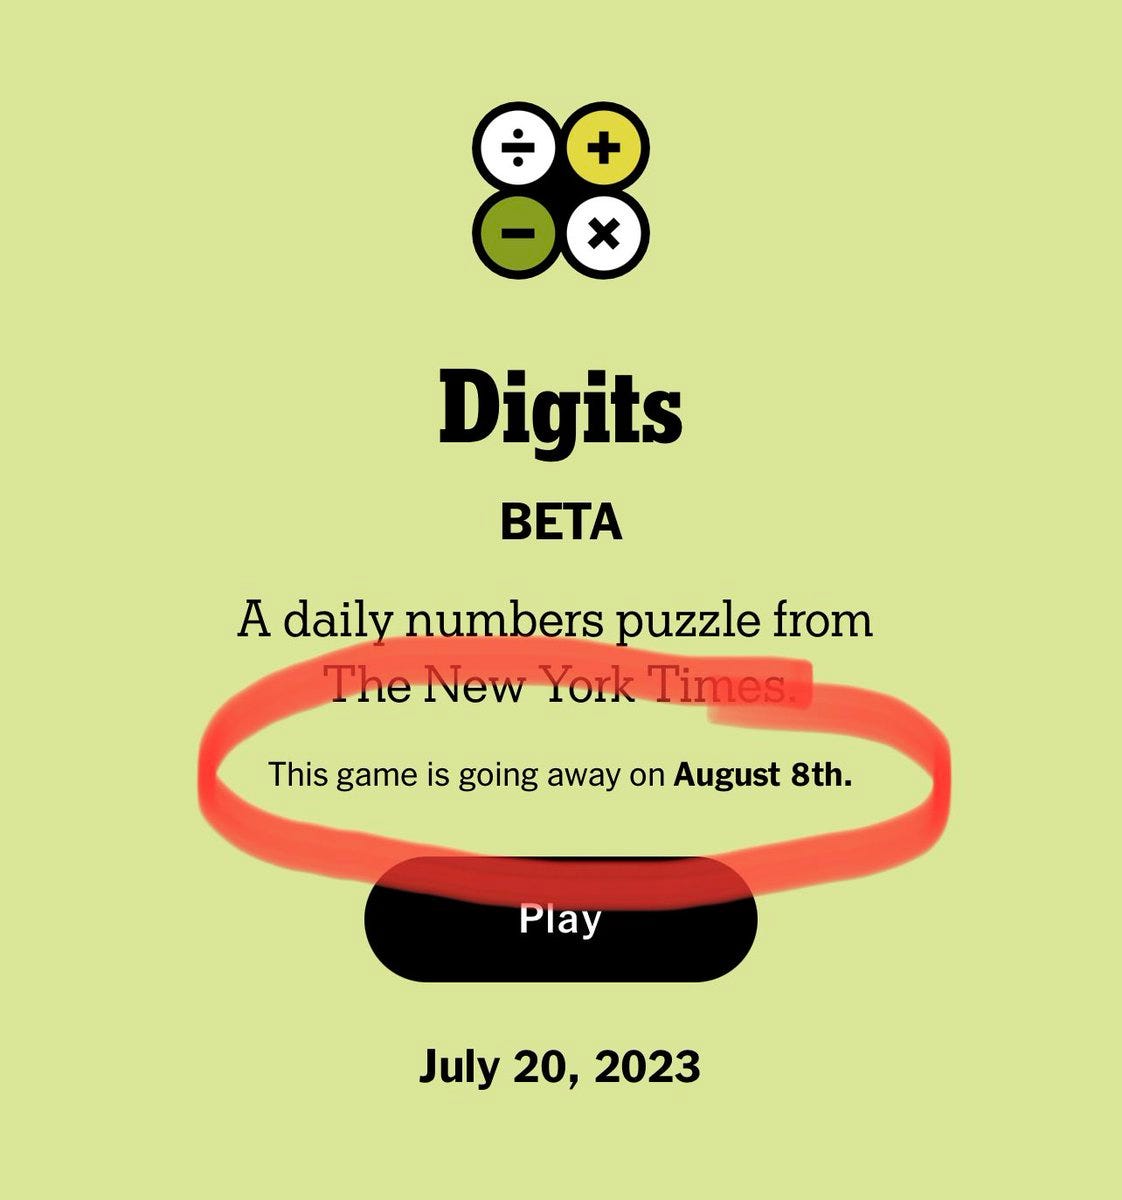 Loading screen for Digits game from The New York Times. "Digits, Beta, A daily numbers puzzle from The New York Times, This game is going away on August 8th, Play, July 20, 2023"